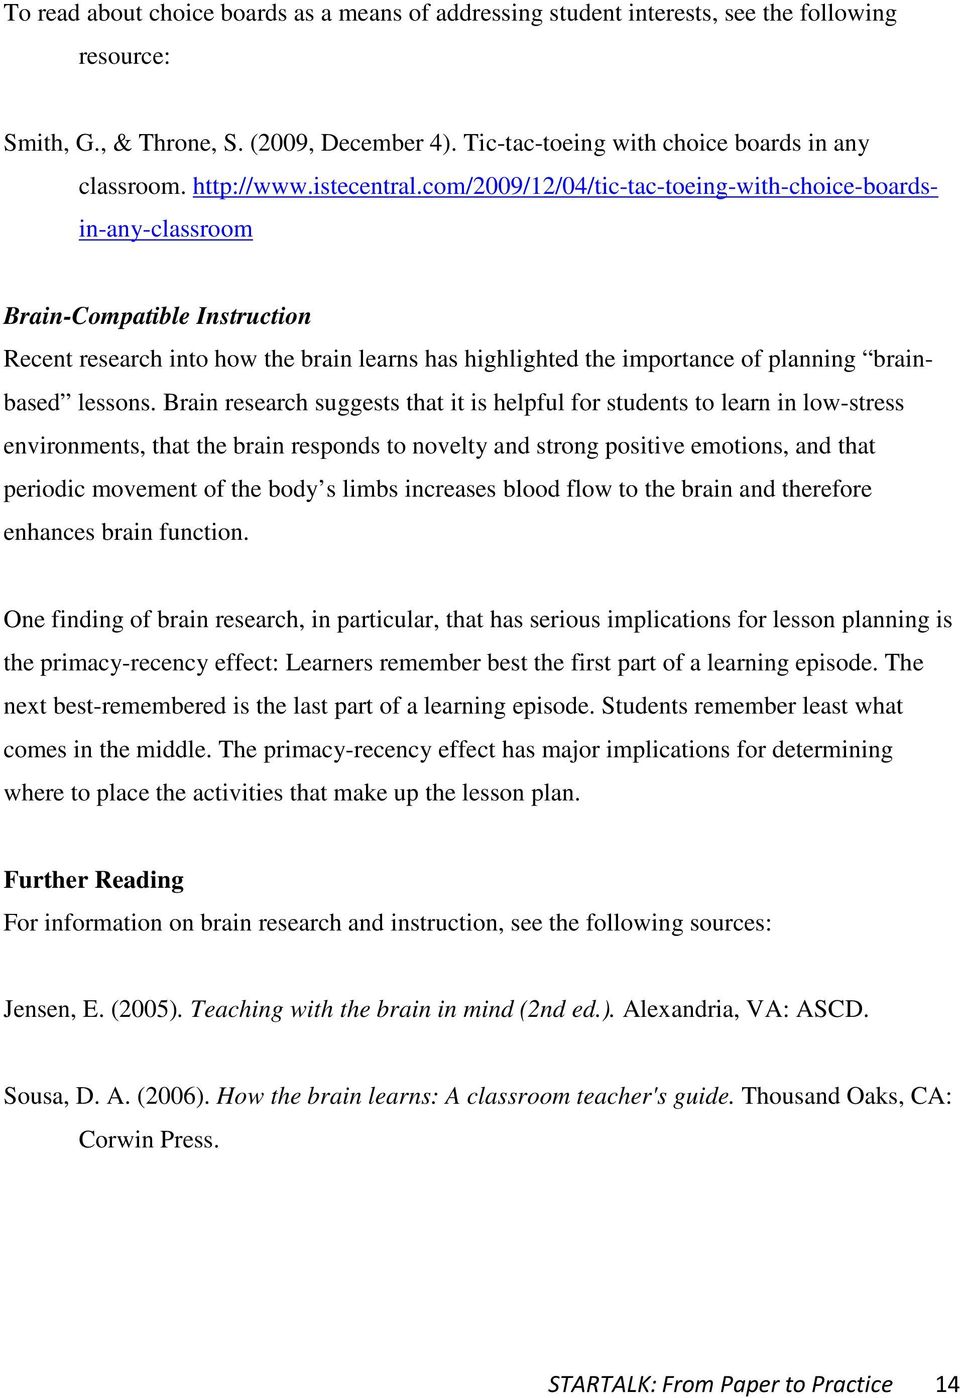 com/2009/12/04/tic-tac-toeing-with-choice-boards- in-any-classroom Brain-Compatible Instruction Recent research into how the brain learns has highlighted the importance of planning brainbased lessons.